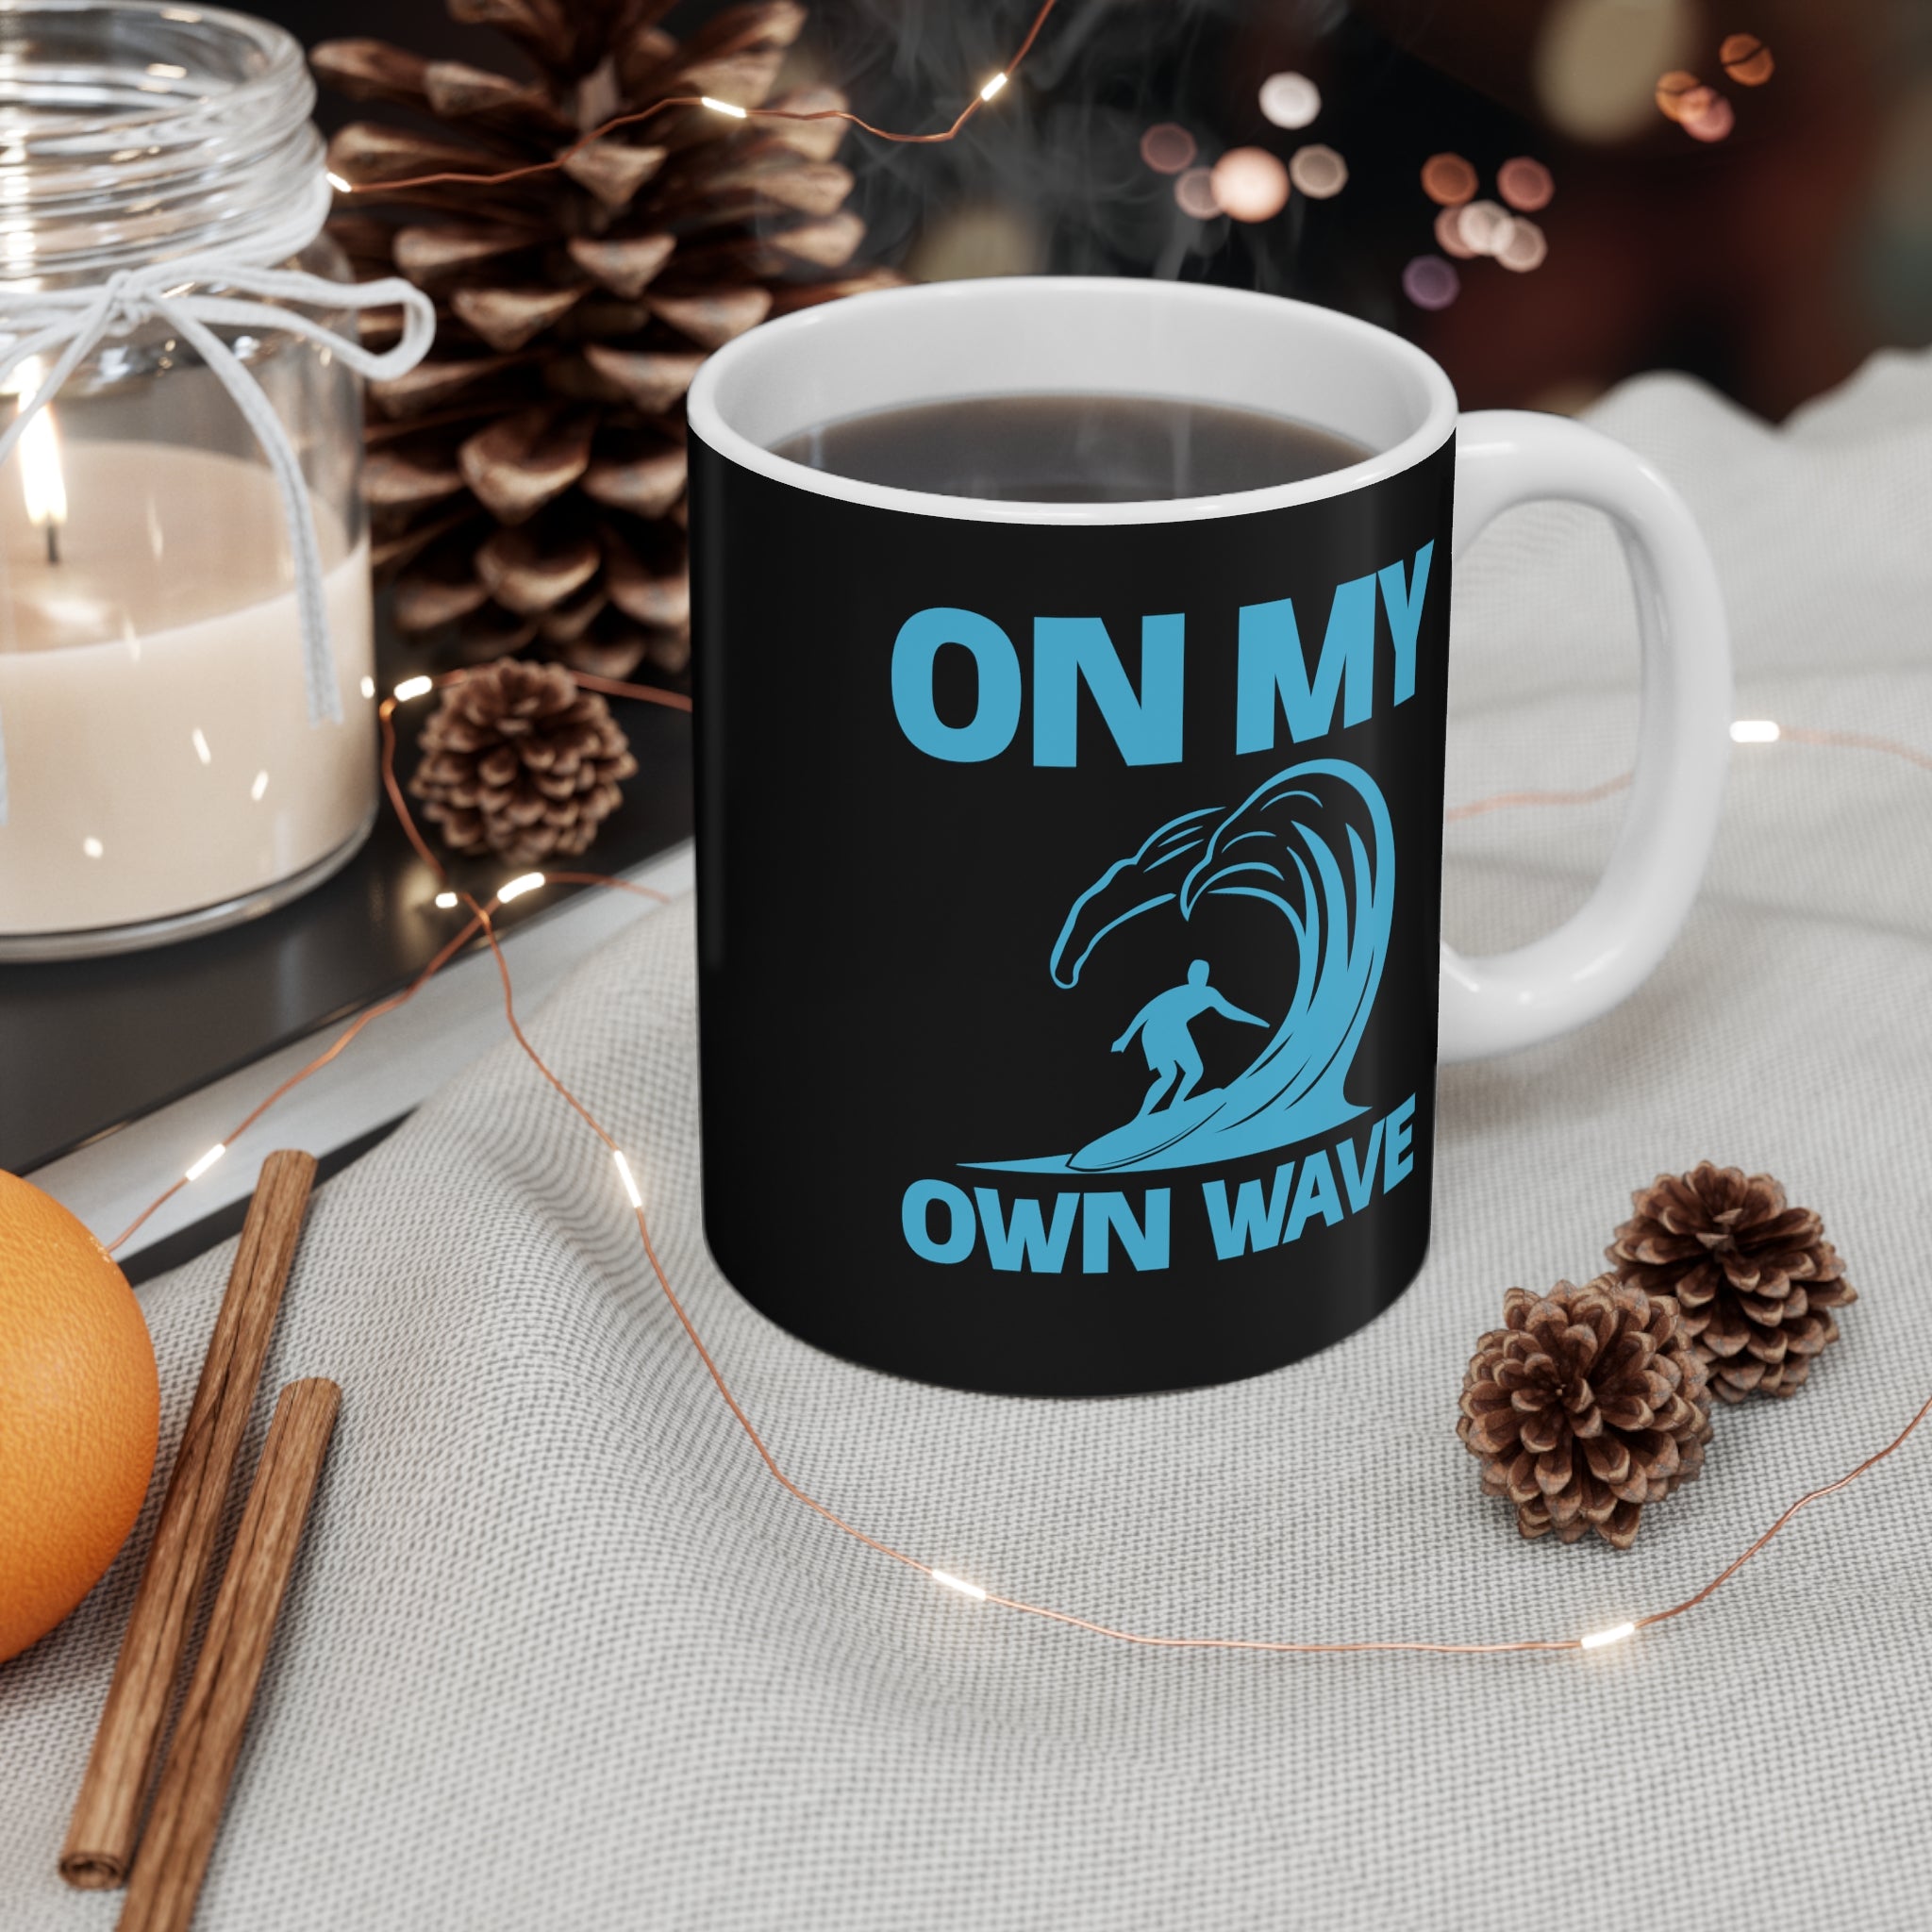 On My OWN Wave Coffee Cup